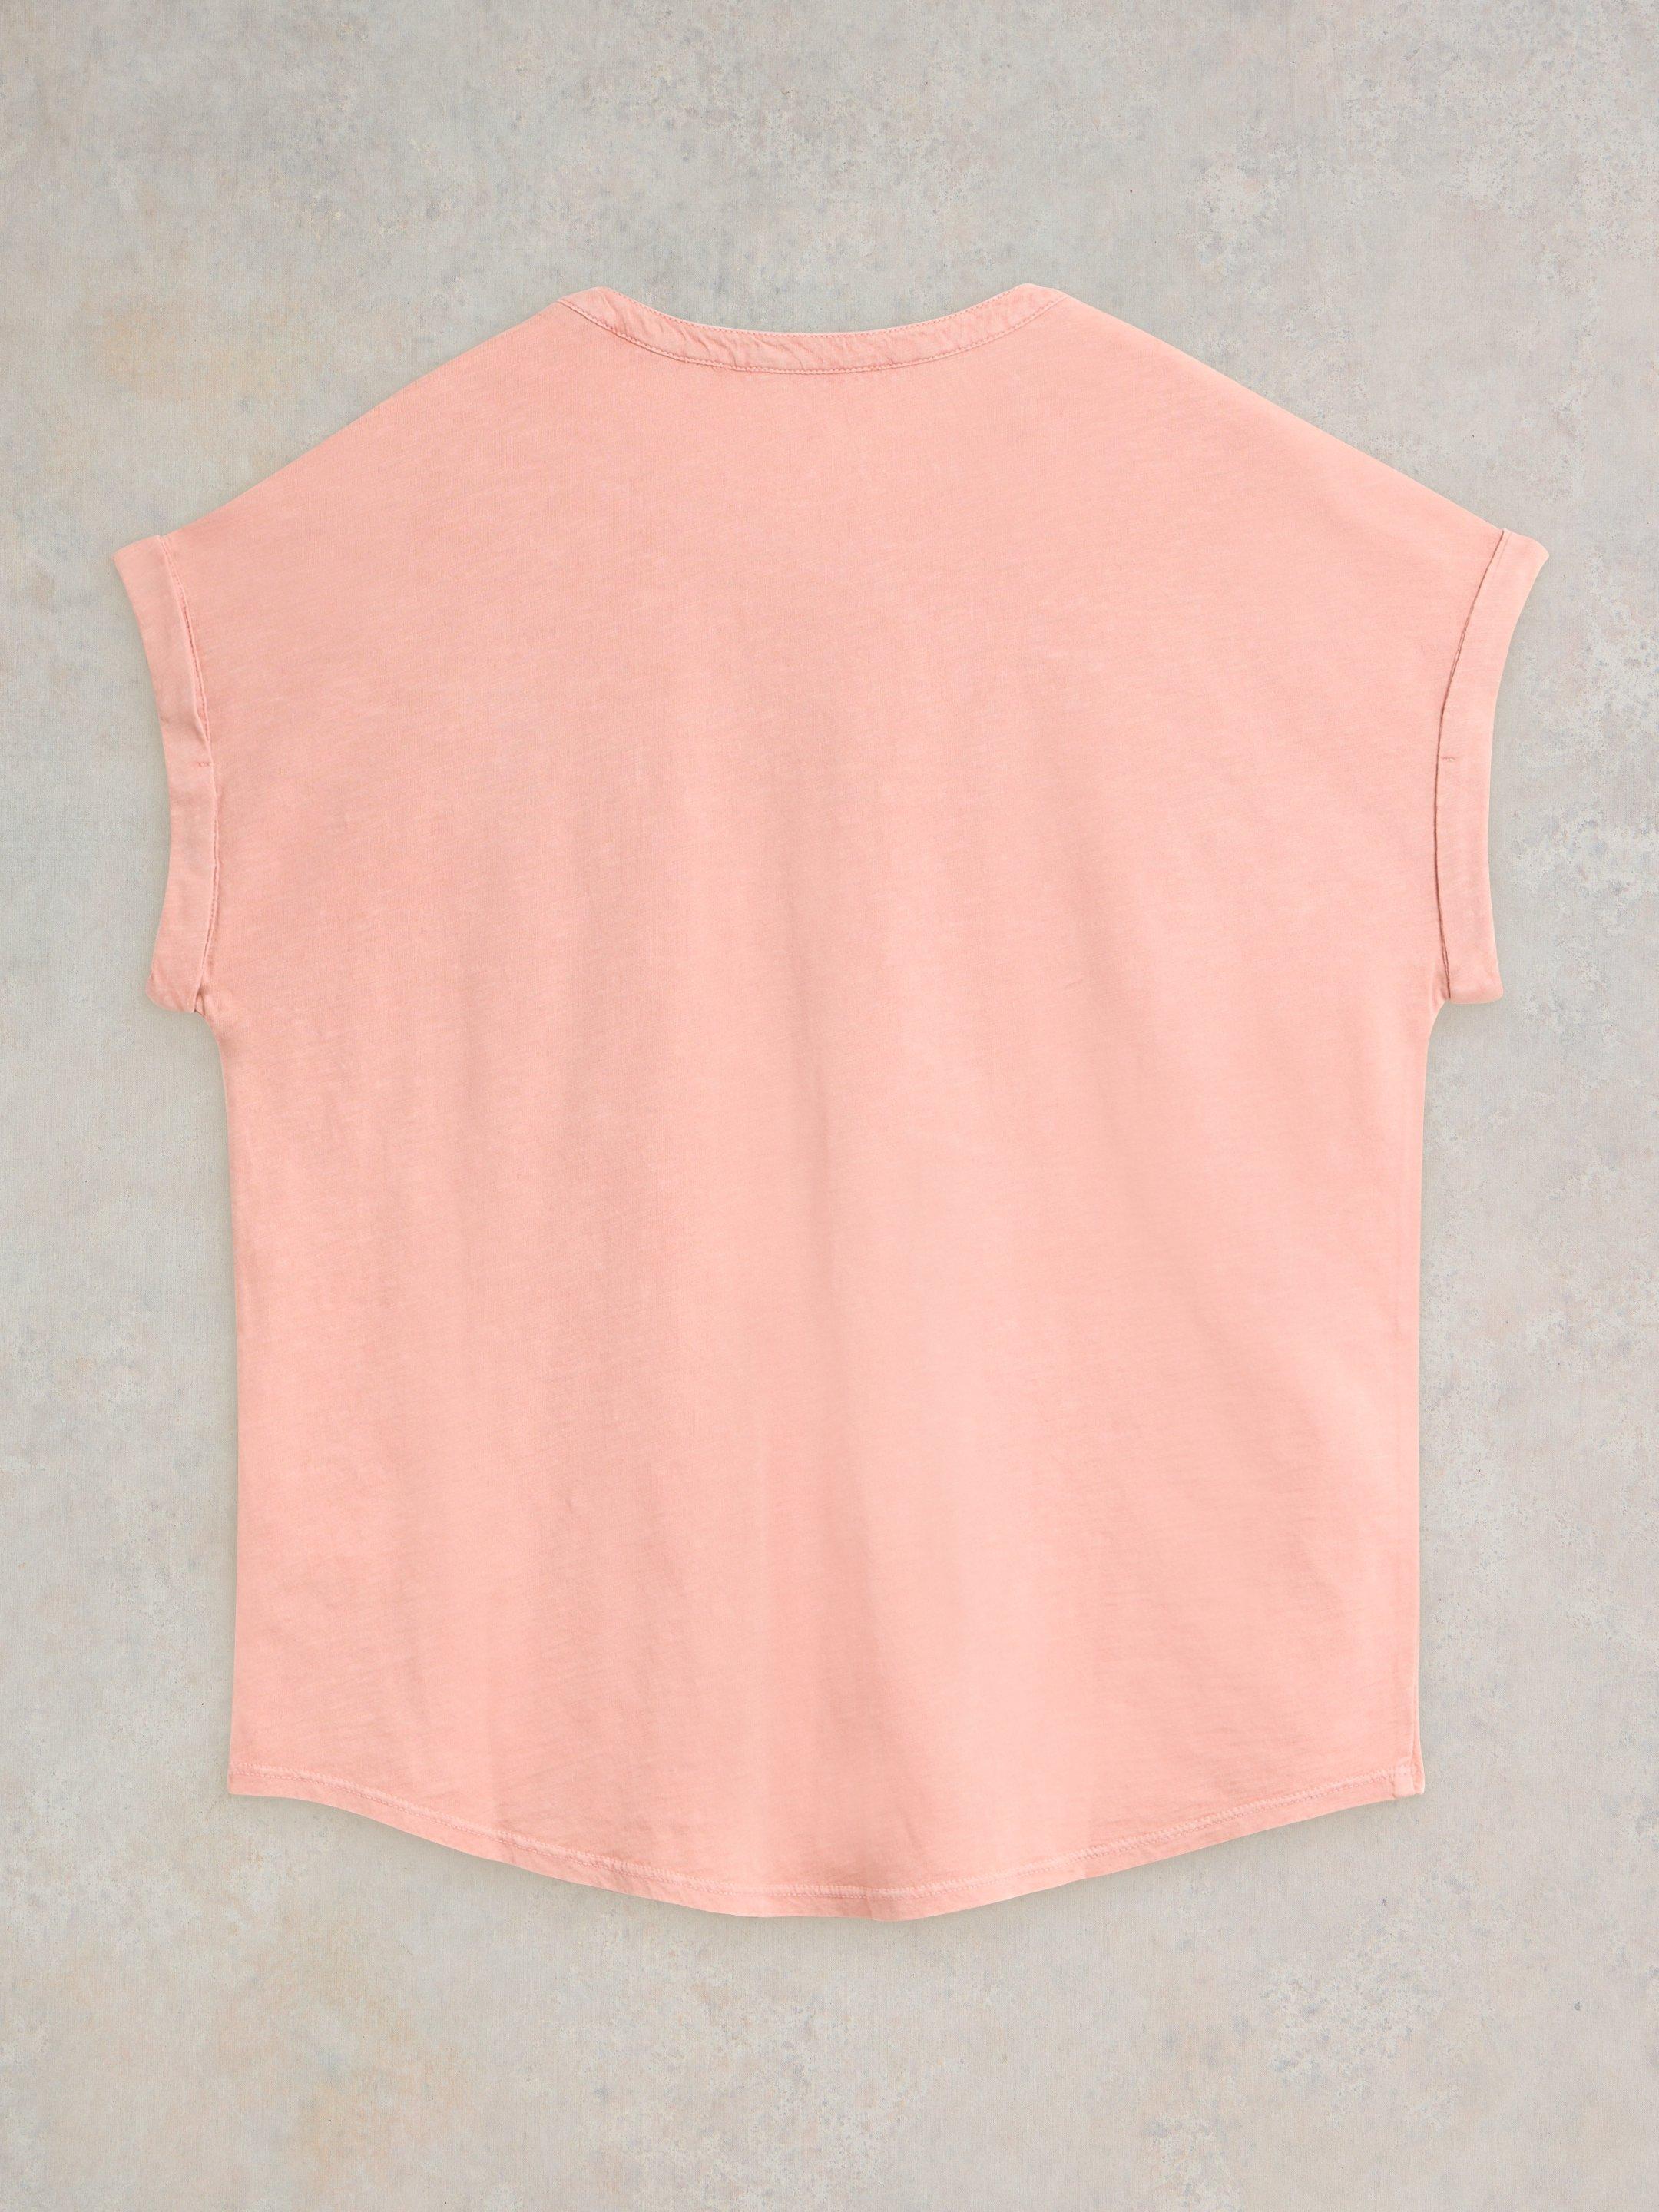 BETH JERSEY SHIRT in DUS PINK - FLAT BACK